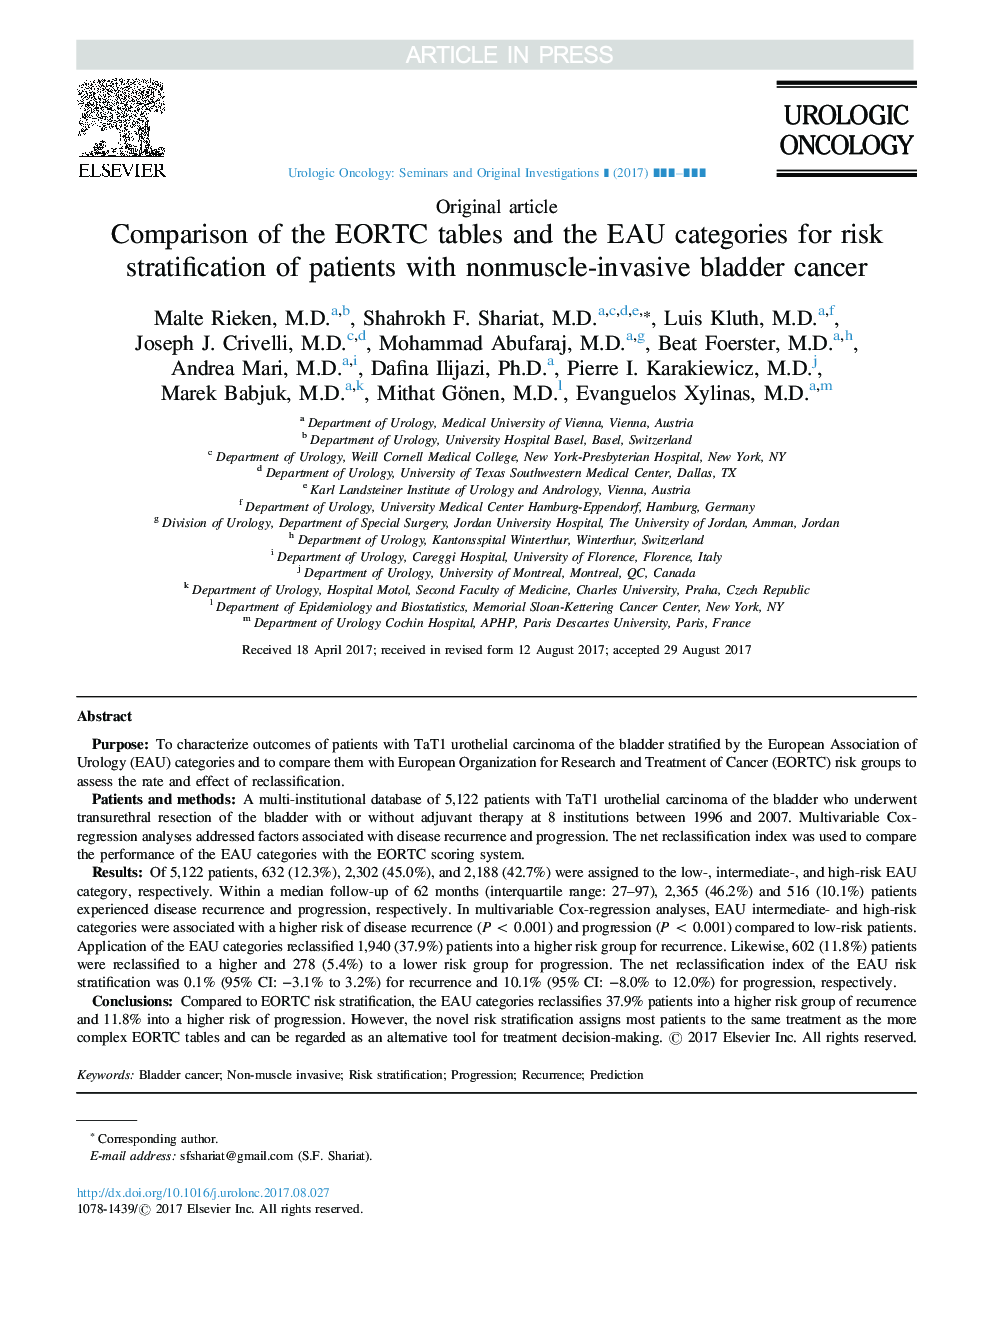 Comparison of the EORTC tables and the EAU categories for risk stratification of patients with nonmuscle-invasive bladder cancer